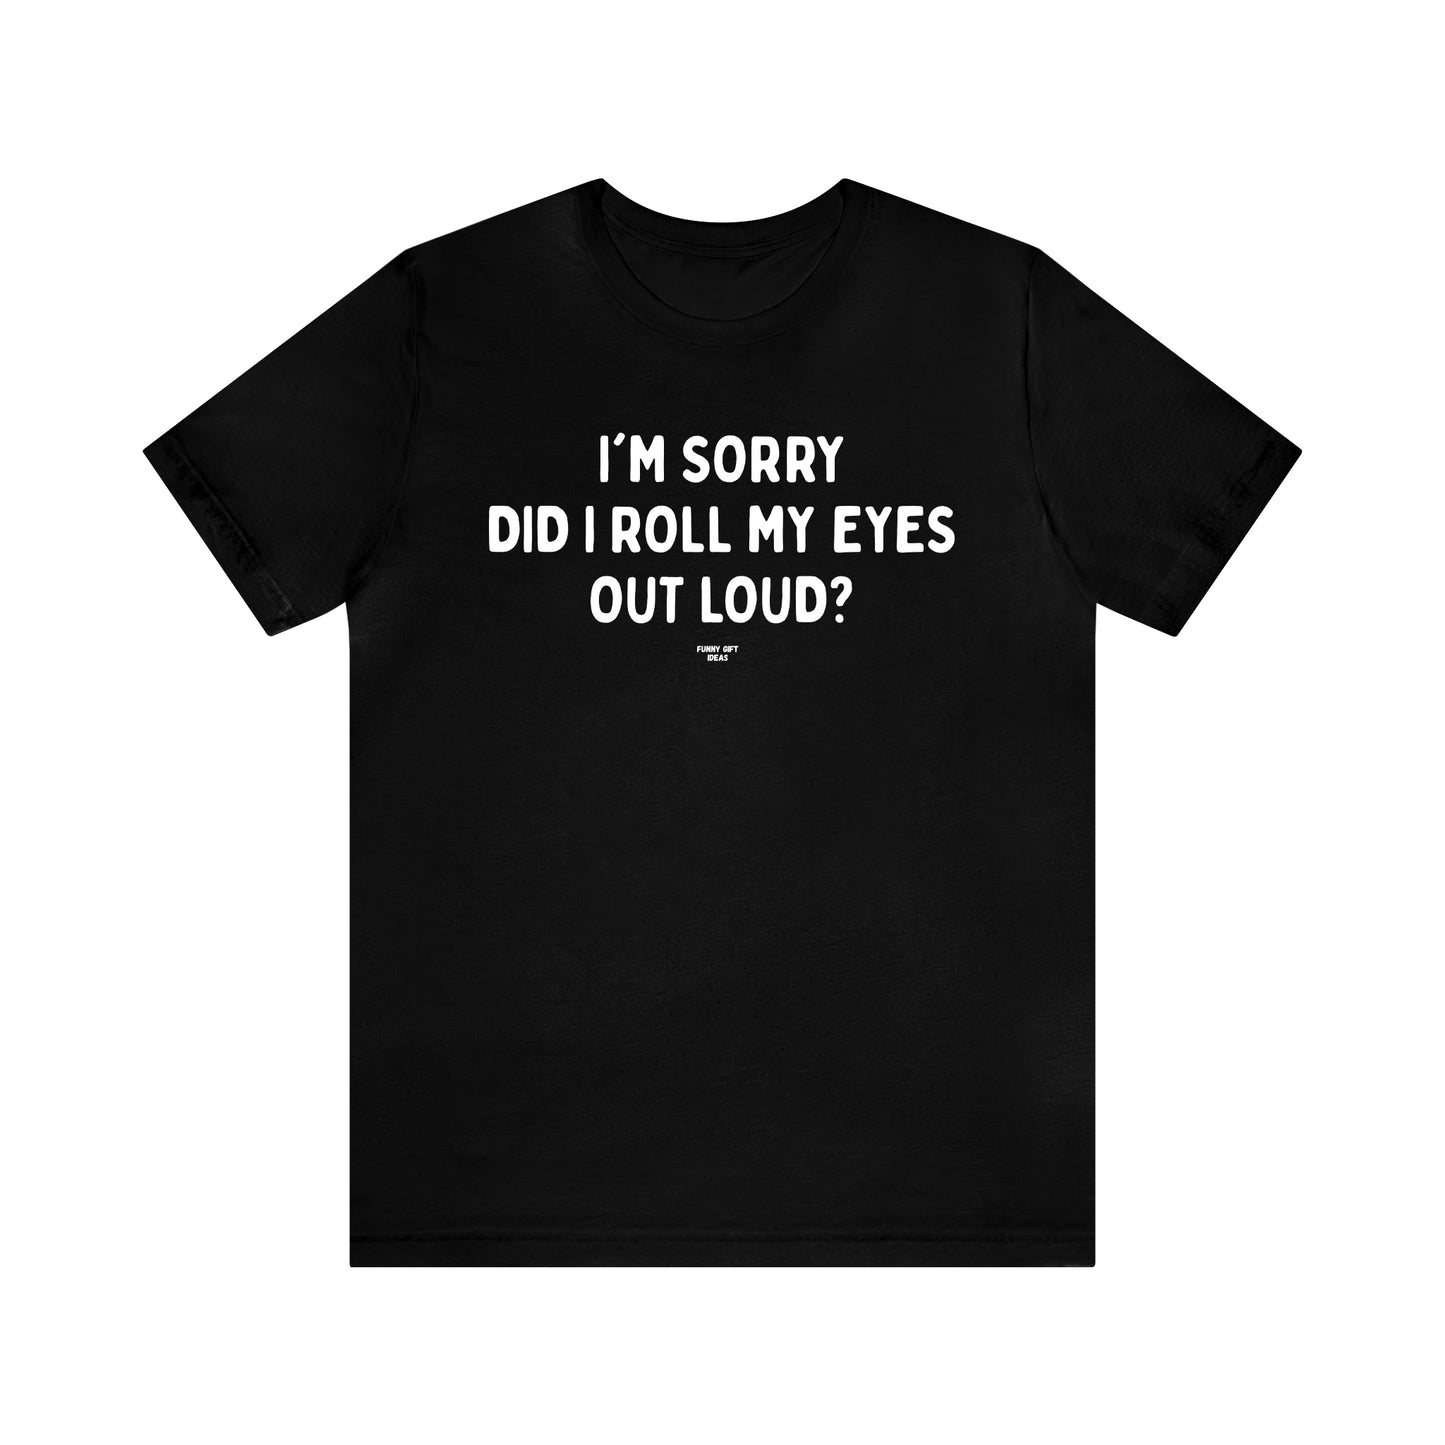 Mens T Shirts - I'm Sorry Did I Roll My Eyes Out Loud? - Funny Men T Shirts